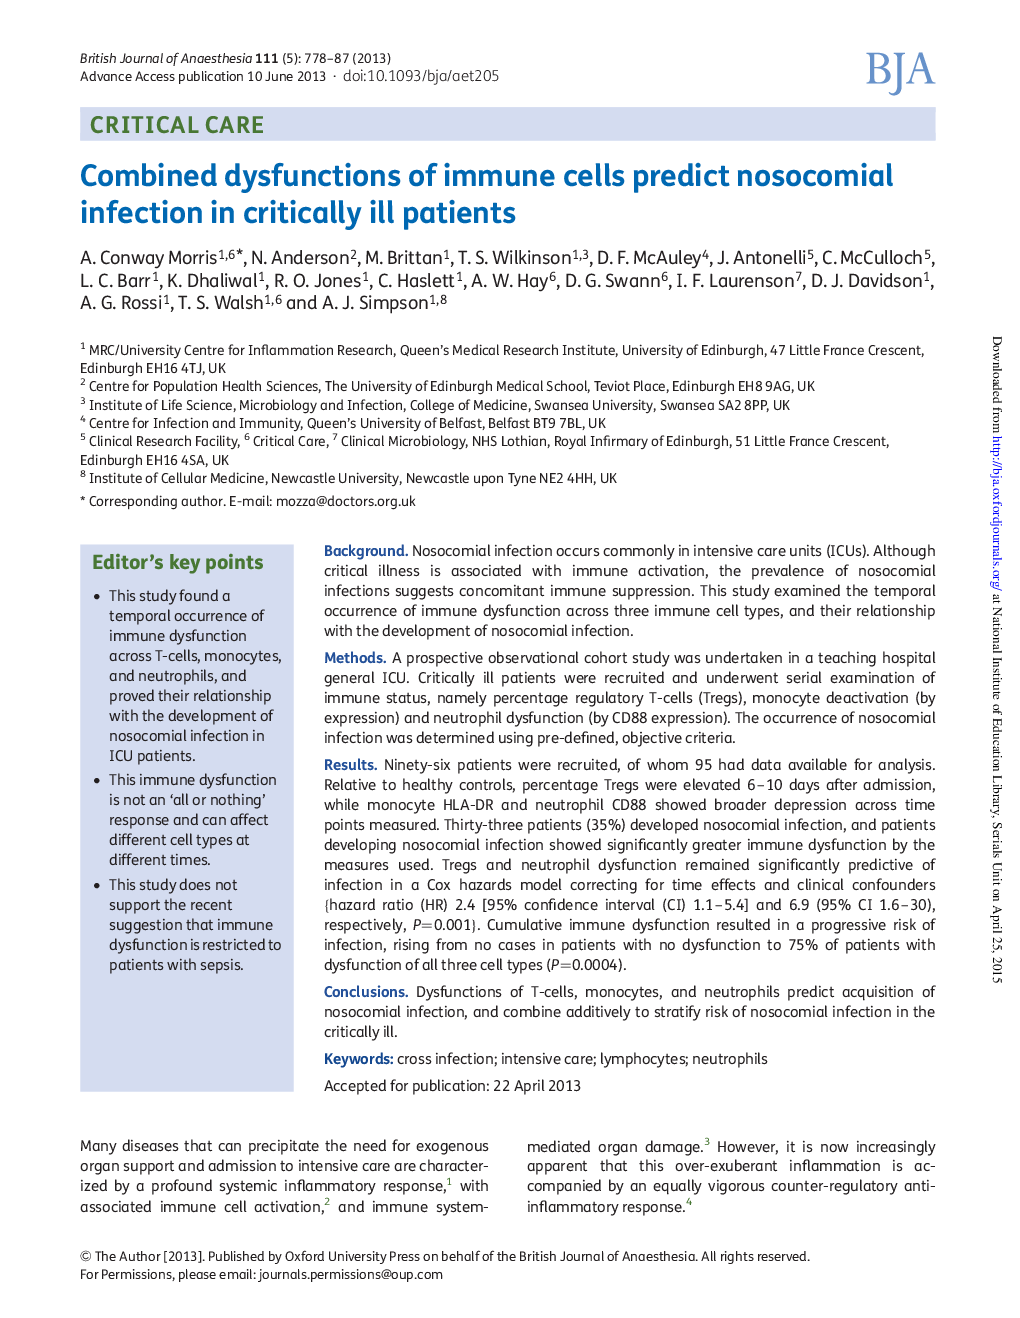 Combined dysfunctions of immune cells predict nosocomial infection in critically ill patients